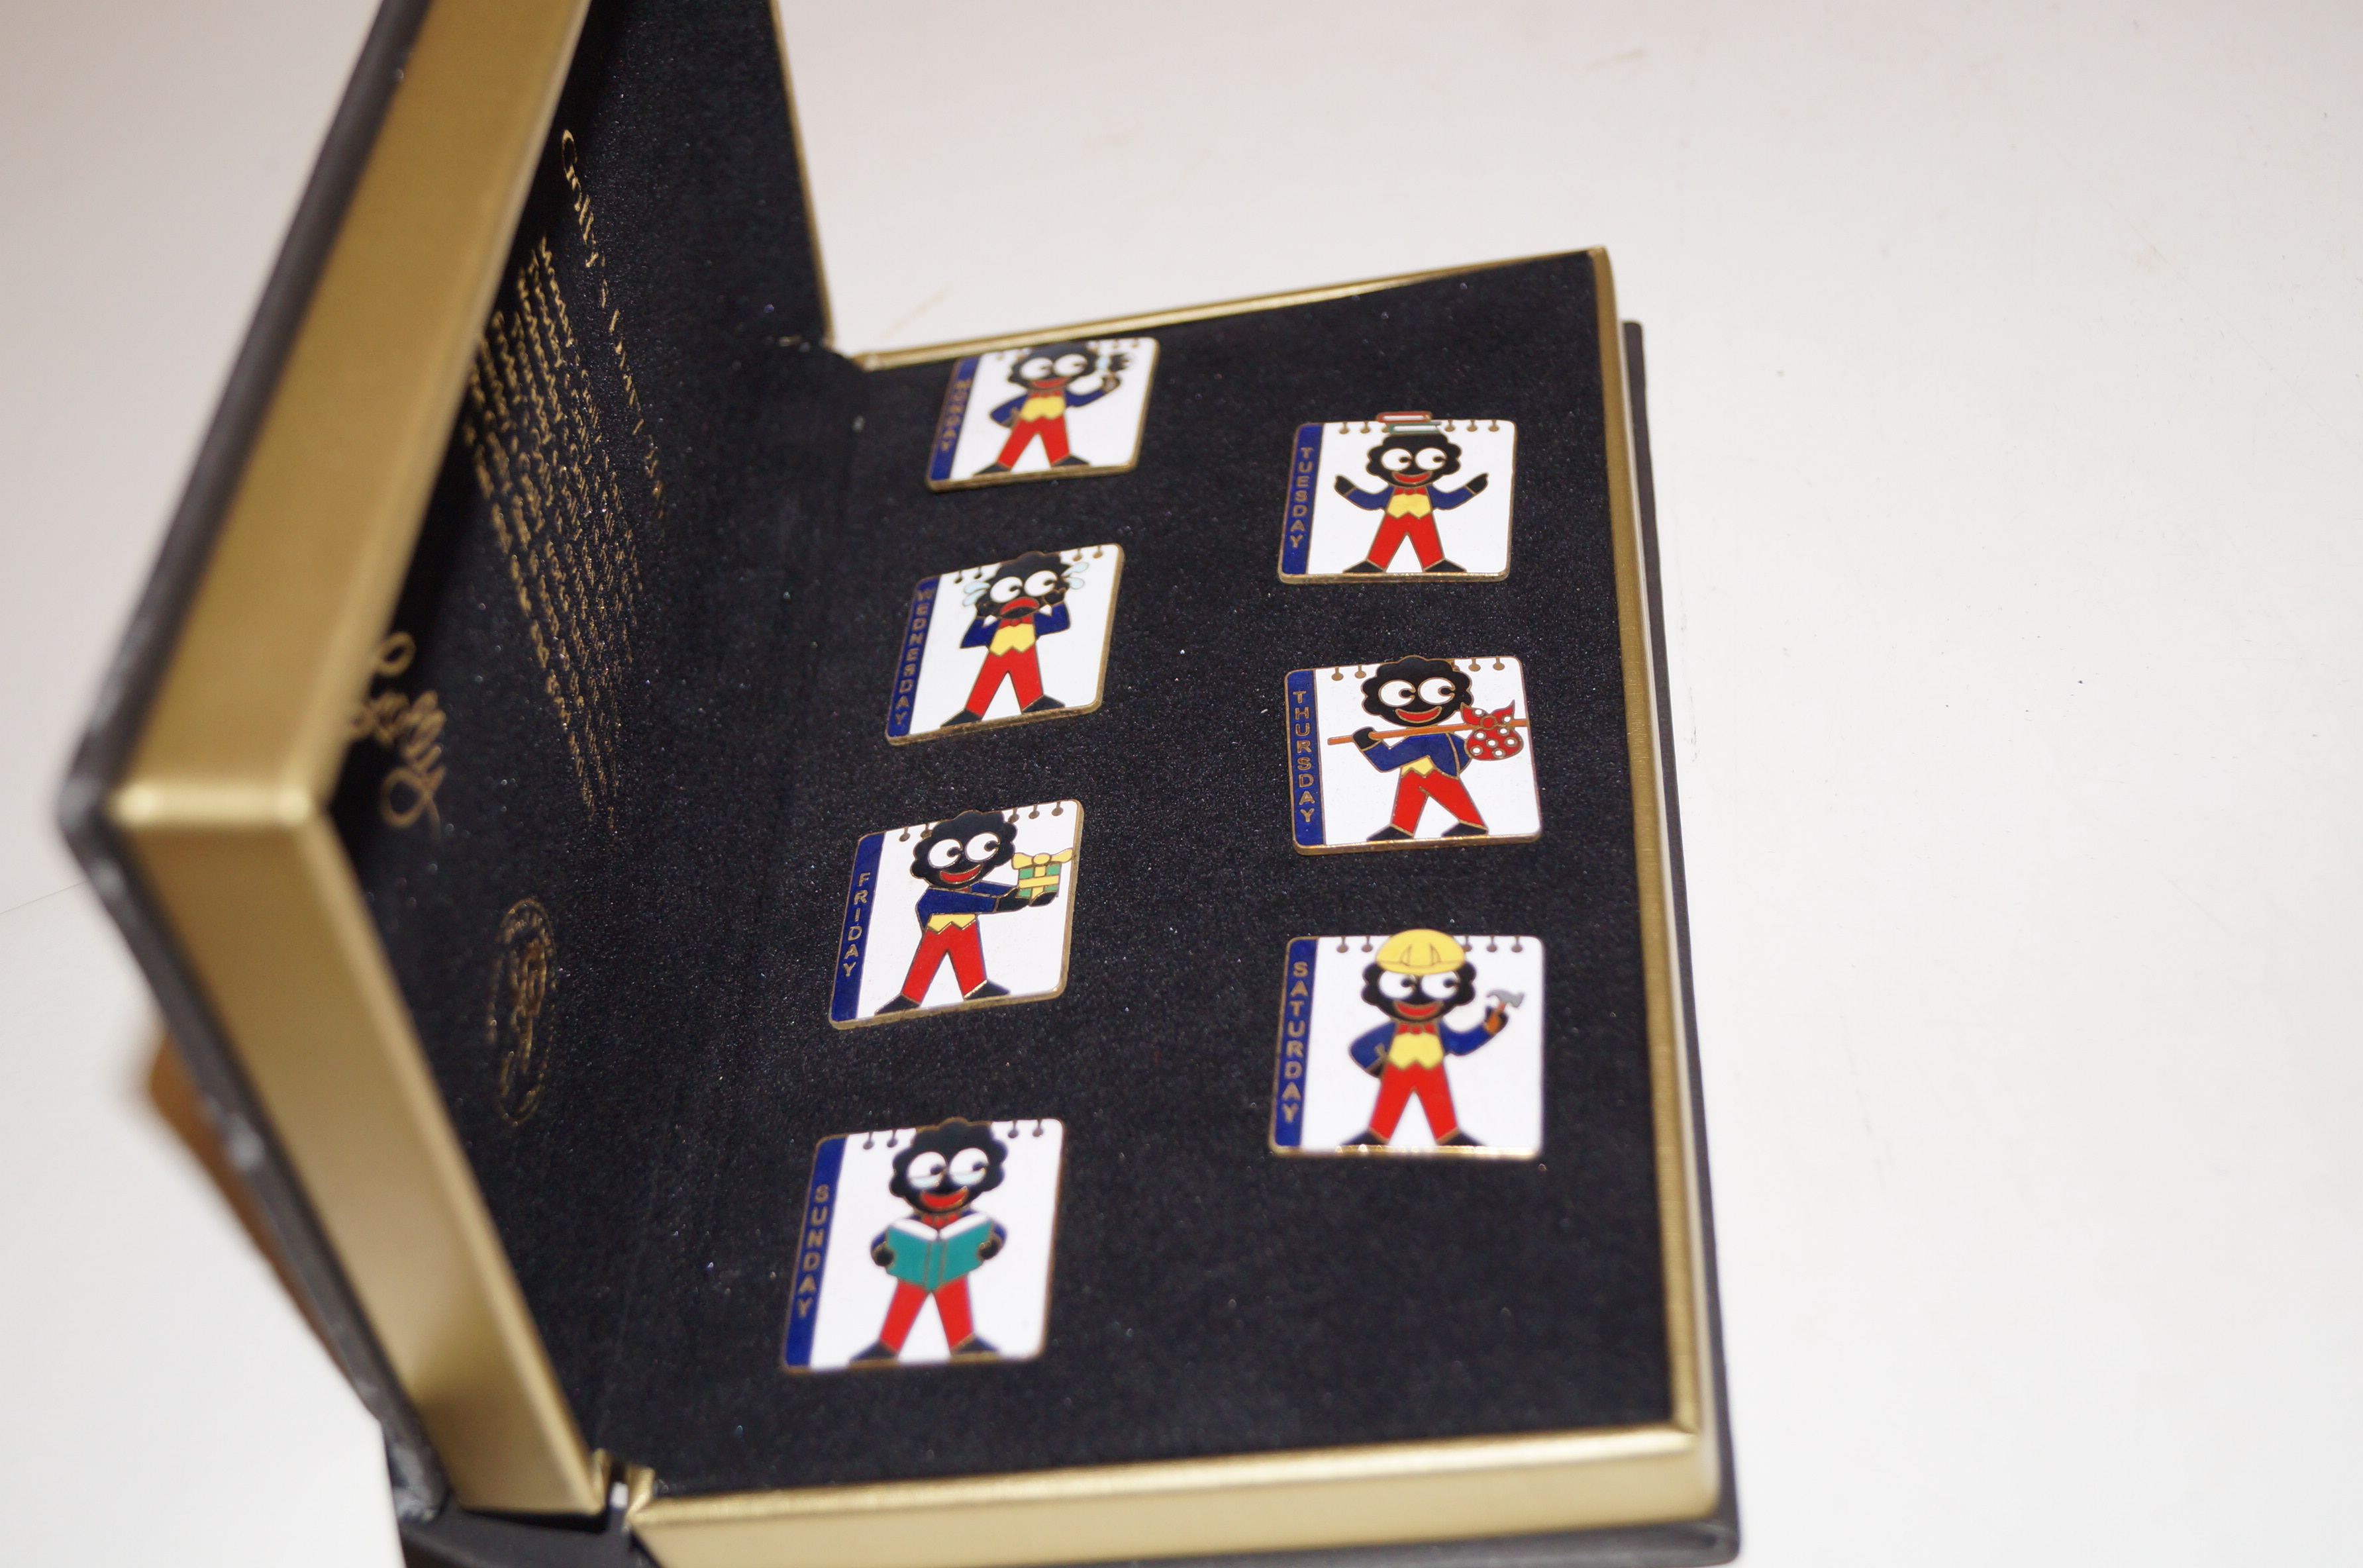 Cased Golly's diary (2001) with seven pin badges